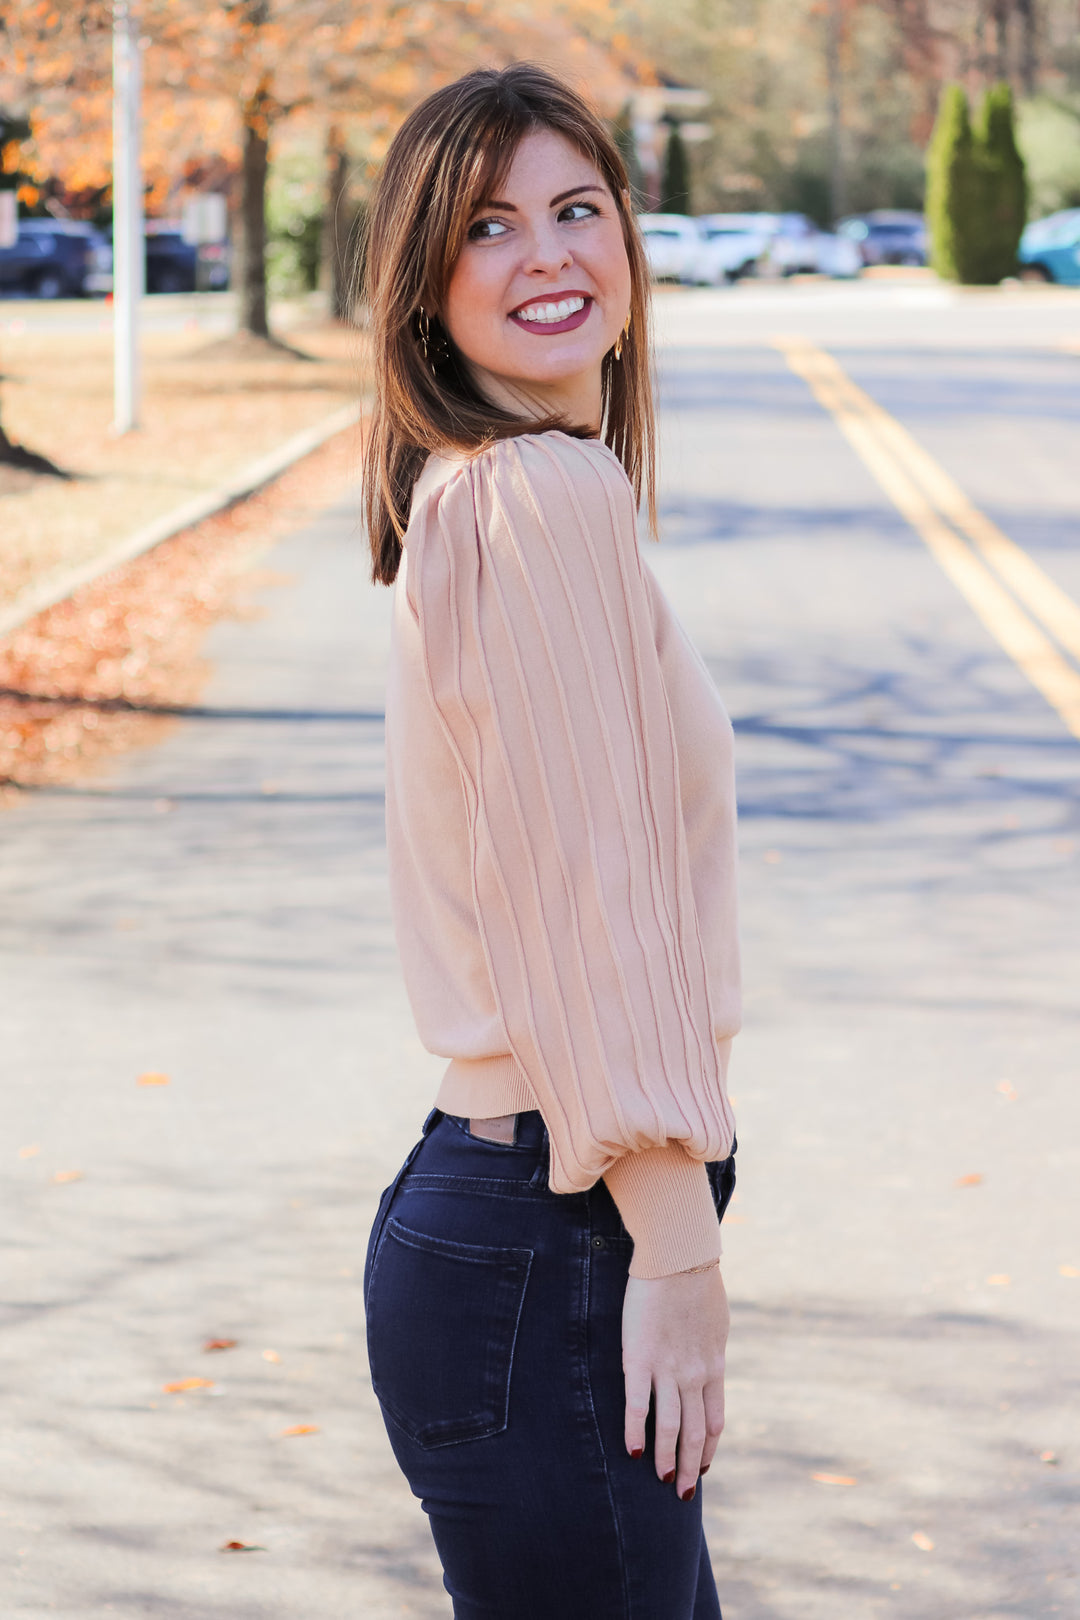 A brunette woman standing outside wearing an oat colored detailed long sleeve sweater with blue jeans.